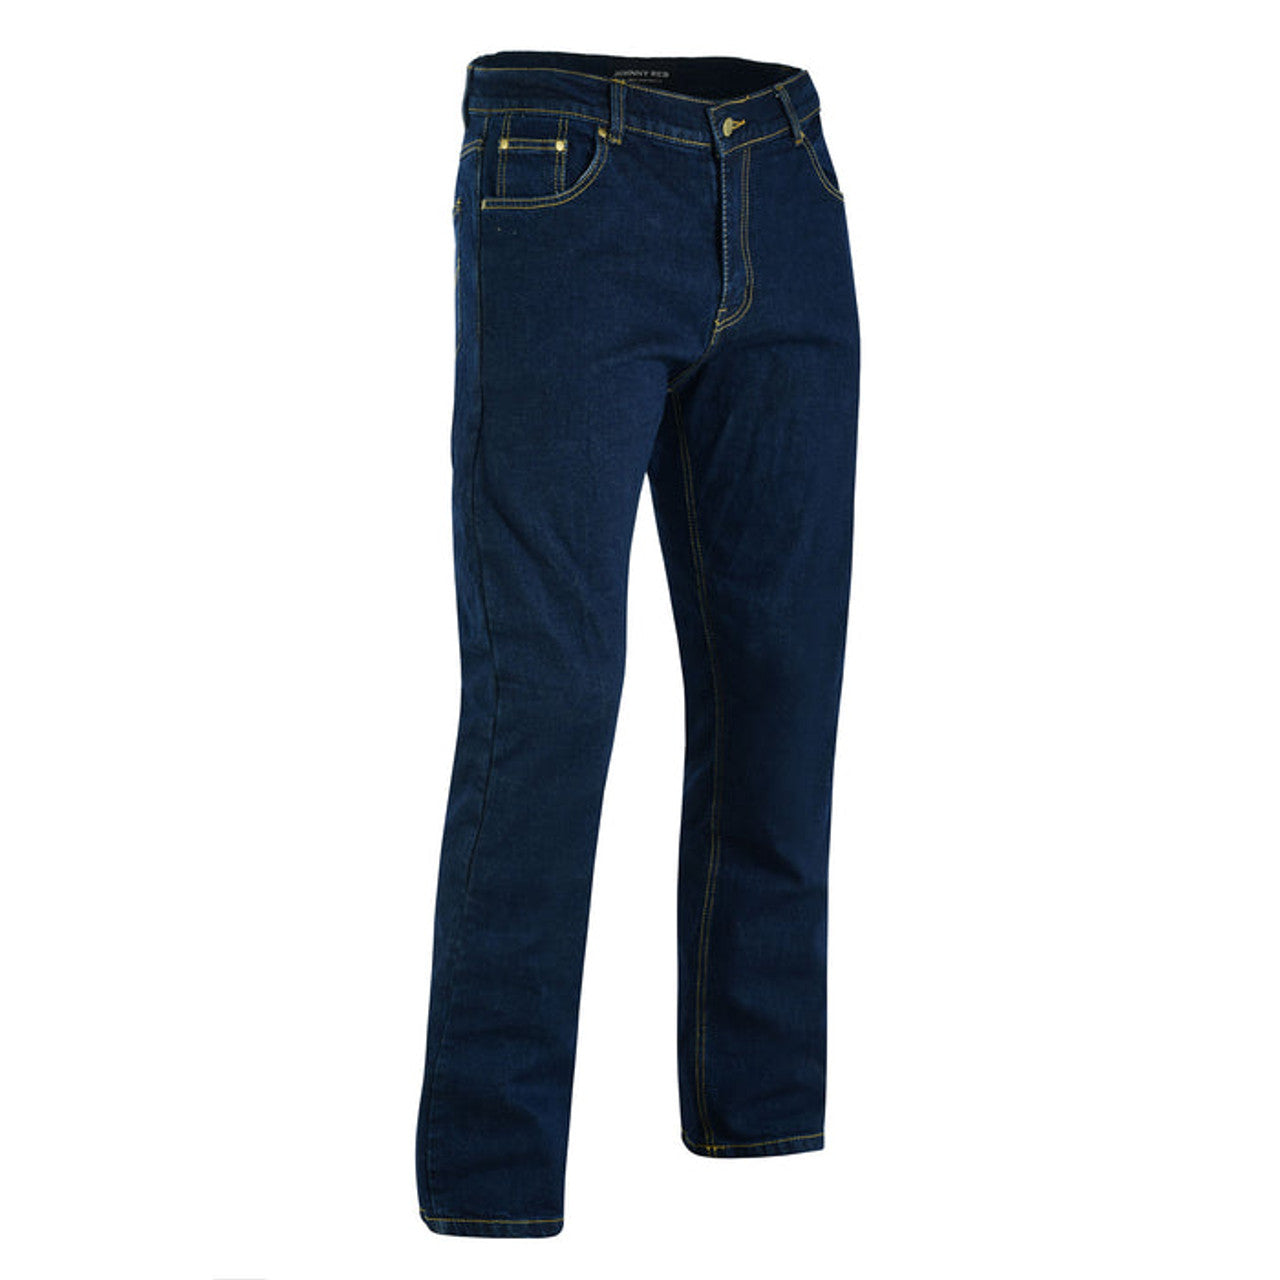 Johnny Reb Men's Hume Protective Jeans